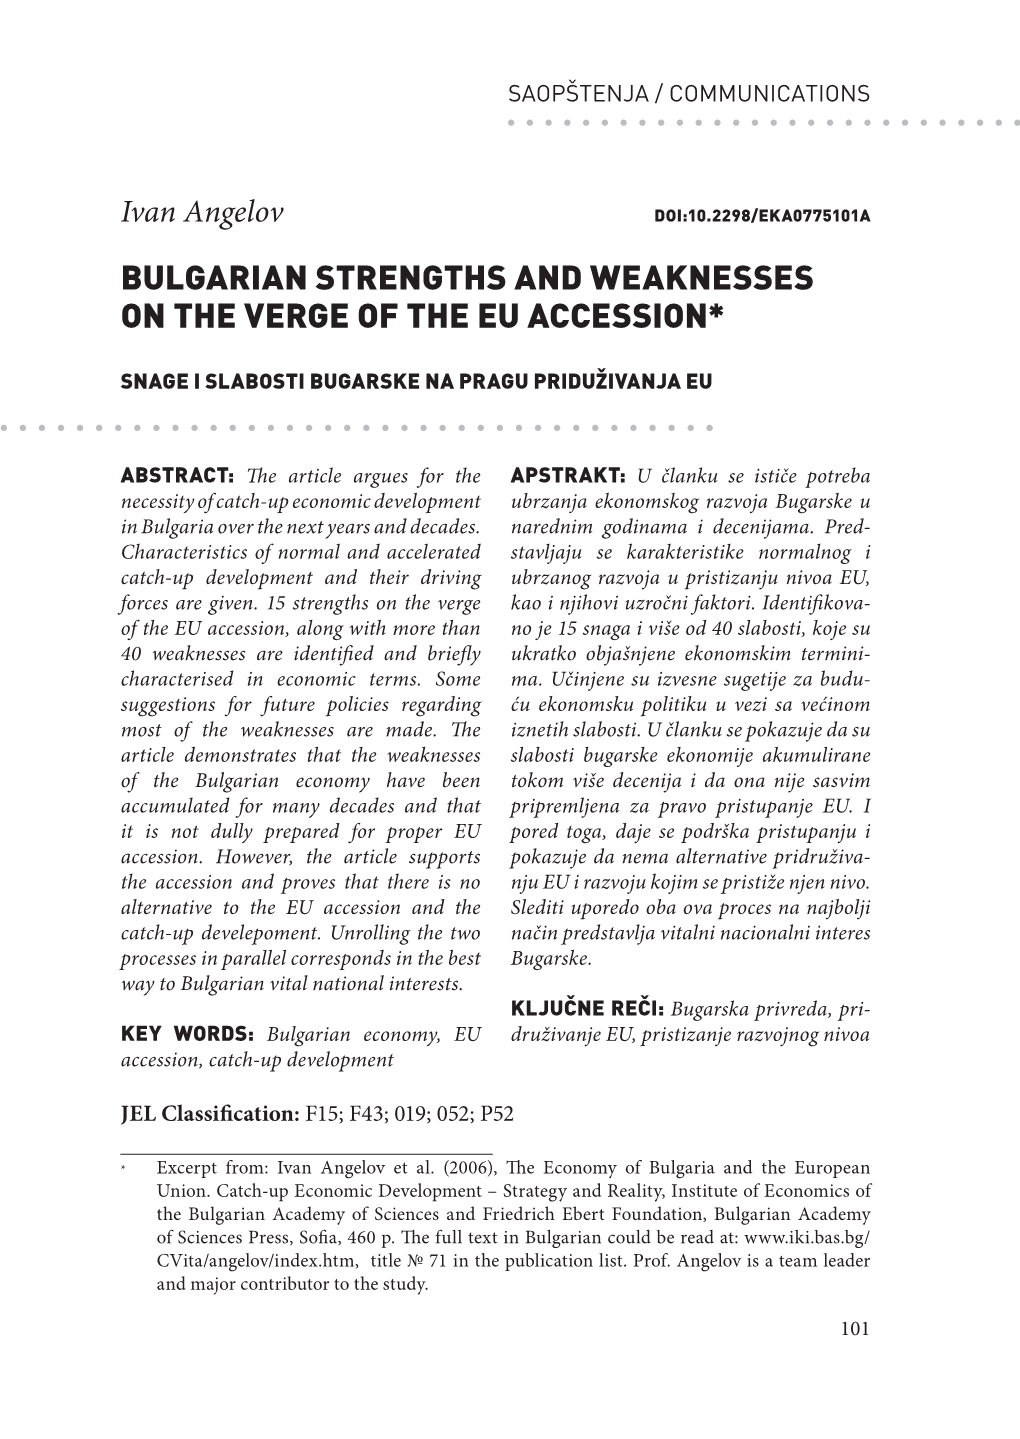 Bulgarian Strengths and Weaknesses on the Verge of the Eu Accession*